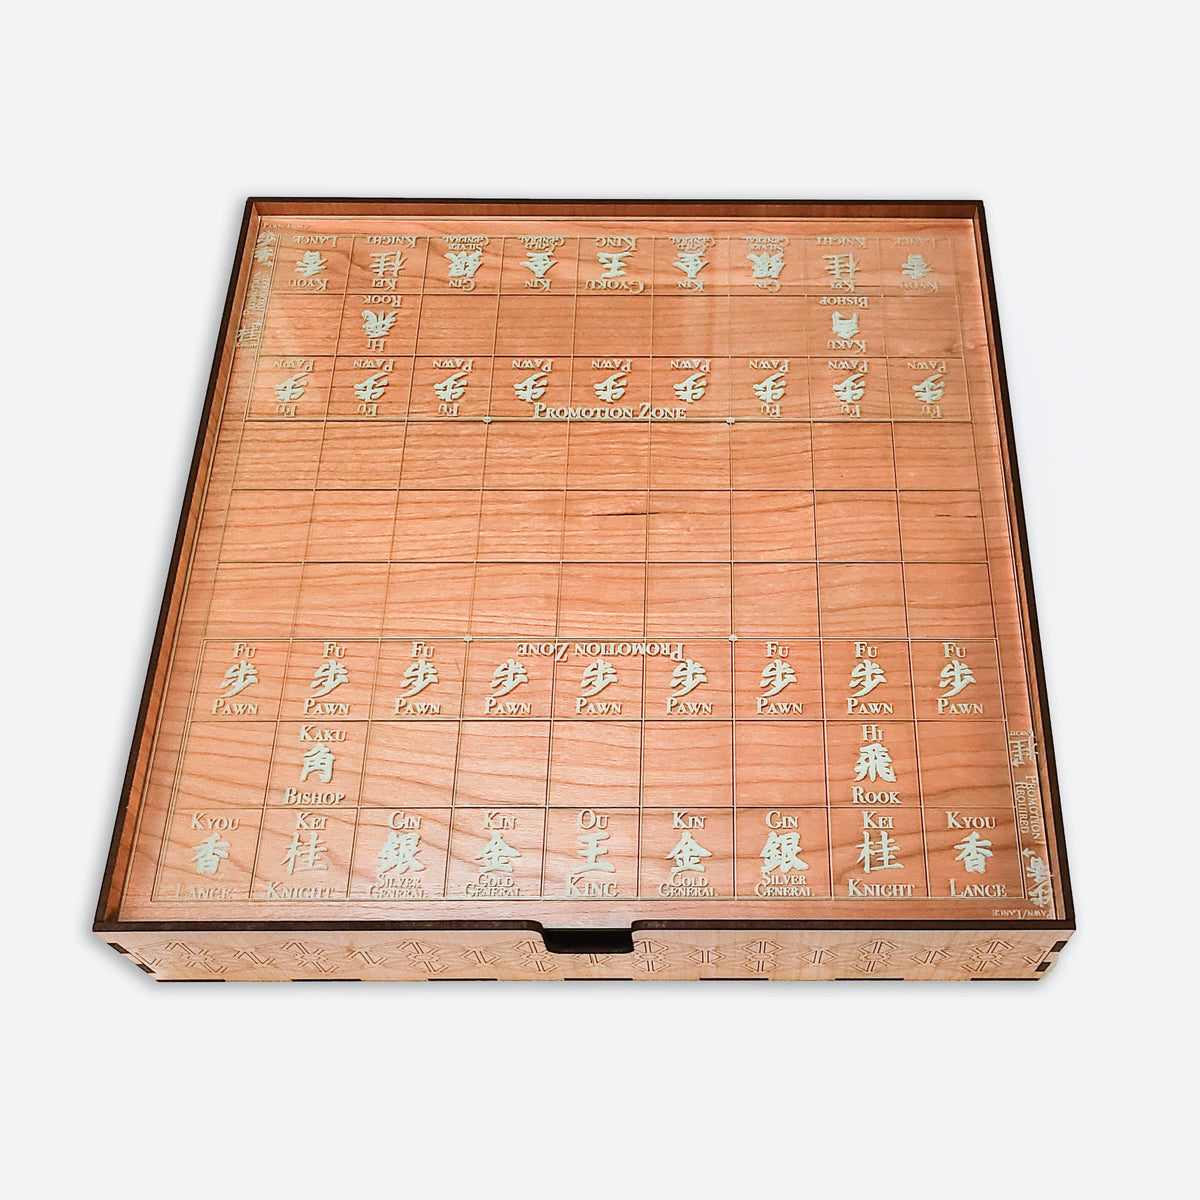 Shogi (Japanese Chess) - Chess Forums - Page 2 